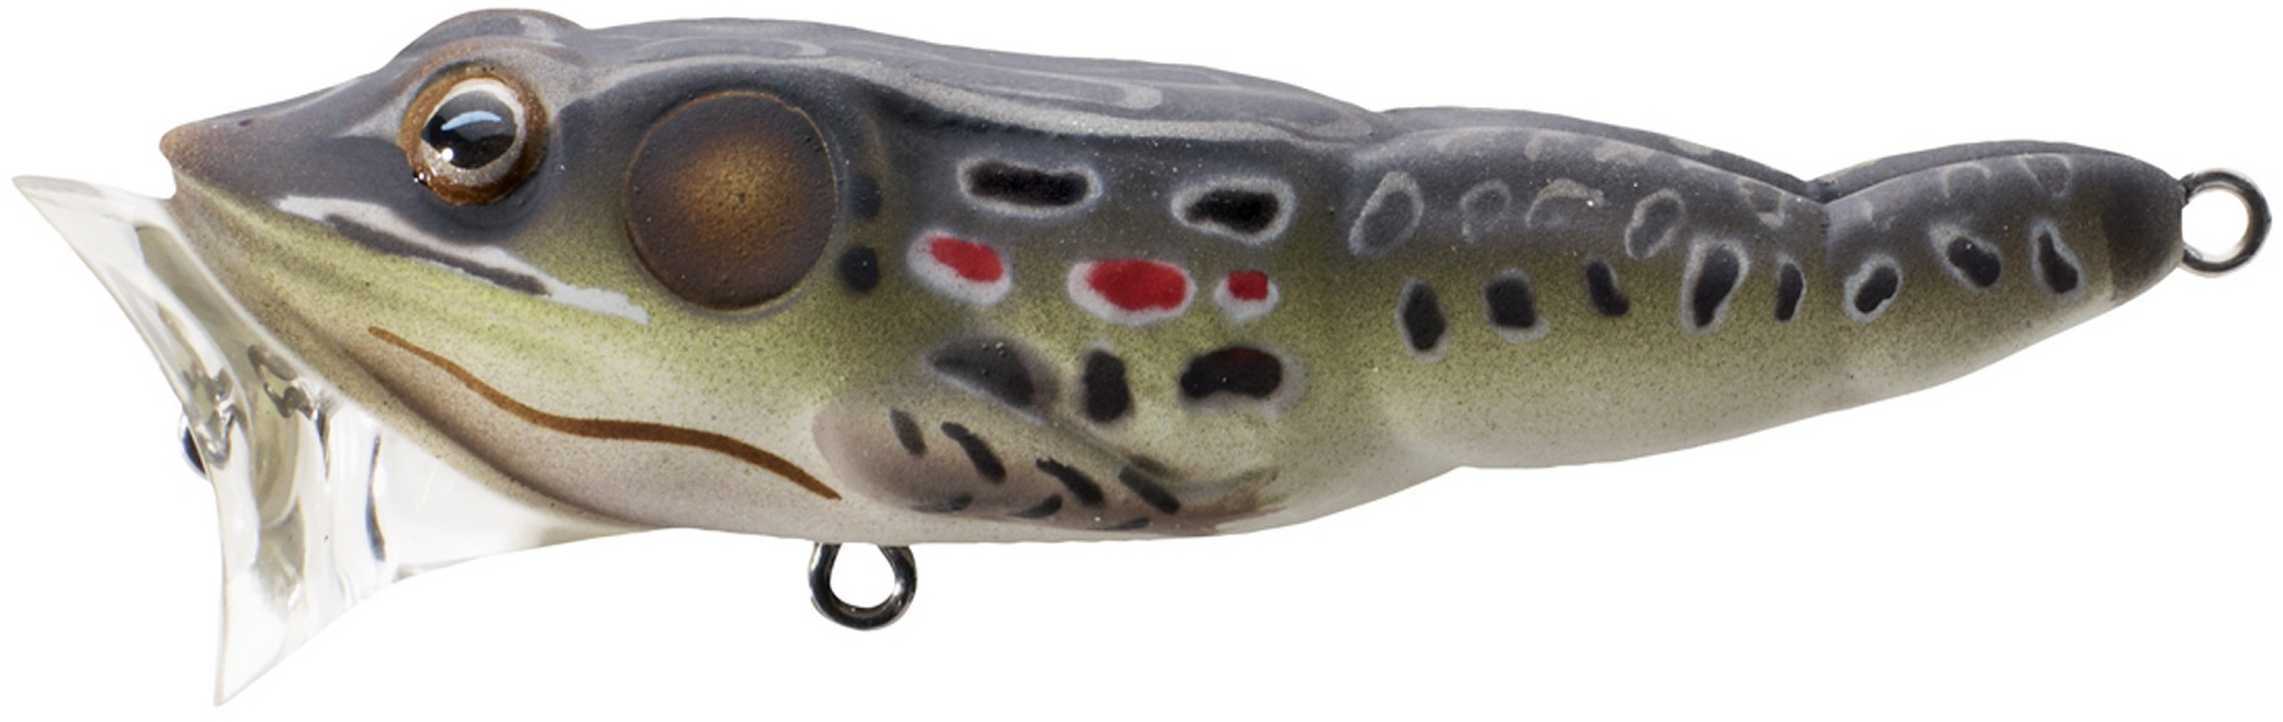 LIVETARGET Lures / Koppers Fishing and Tackle Corp Usa Popper Frog 1/2oz 3in Brn/Black FGP75T503